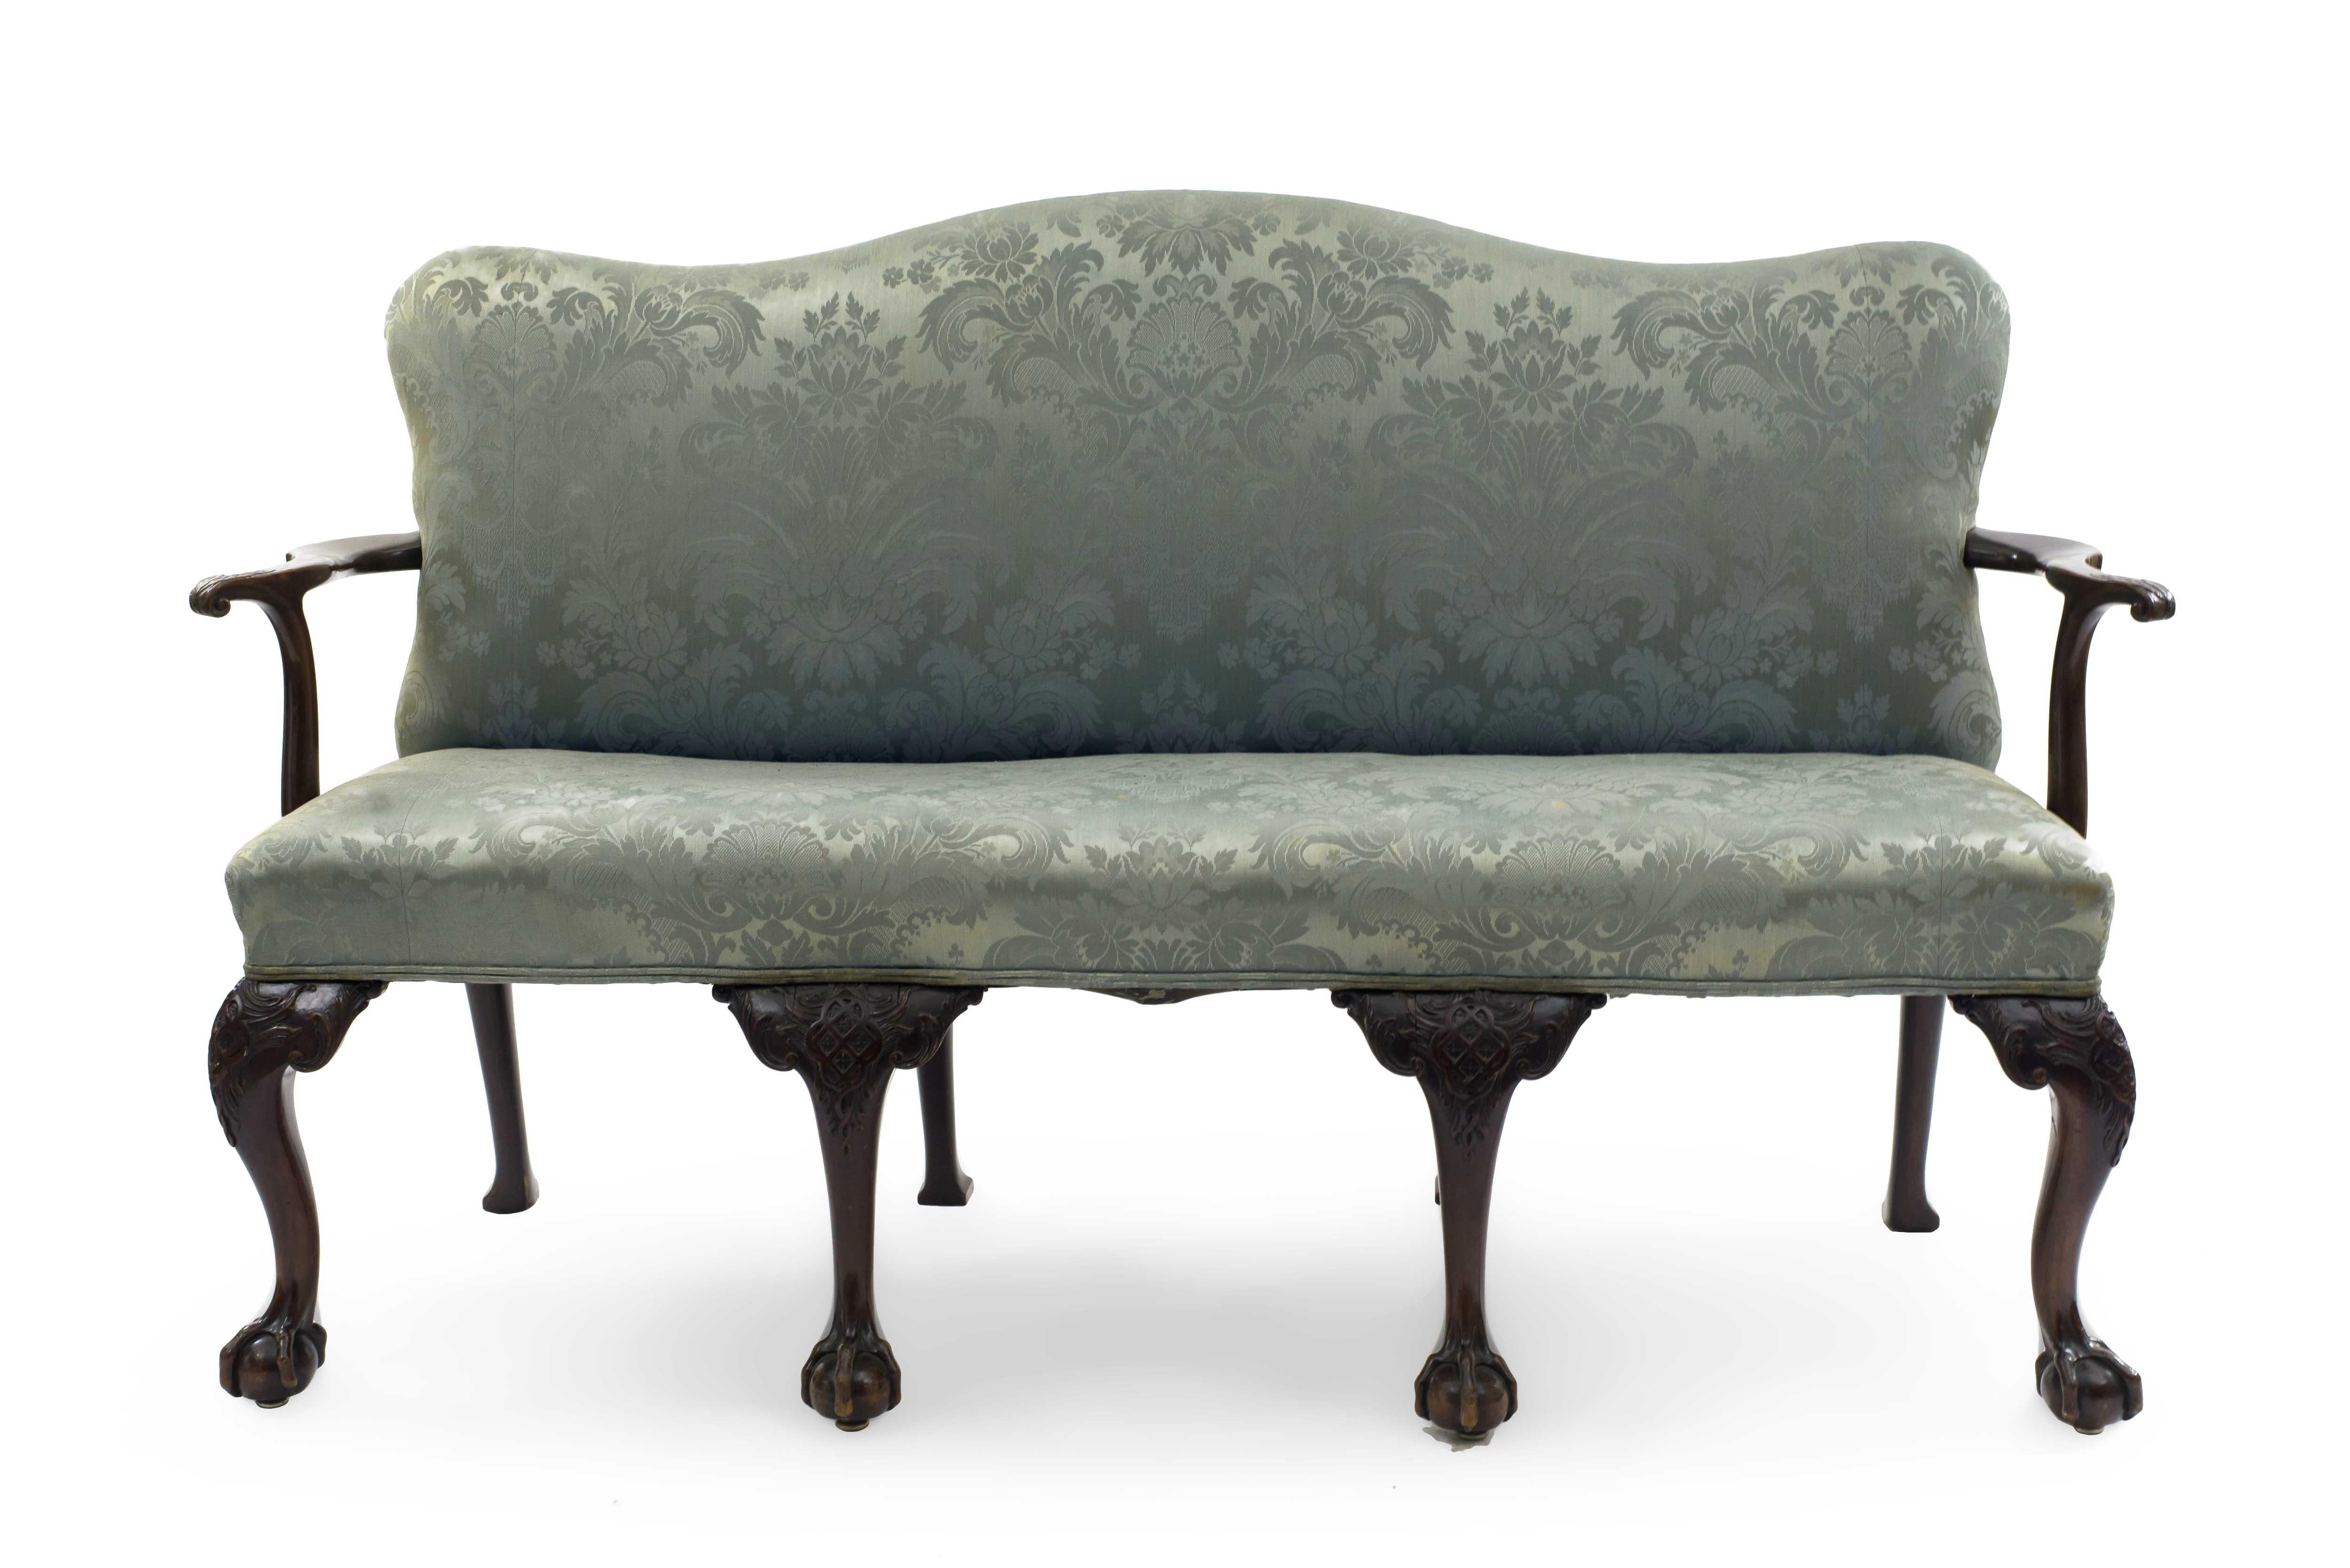 English Chippendale style (19th century) mahogany camel back settee with 4 carved front legs and blue damask upholstery.